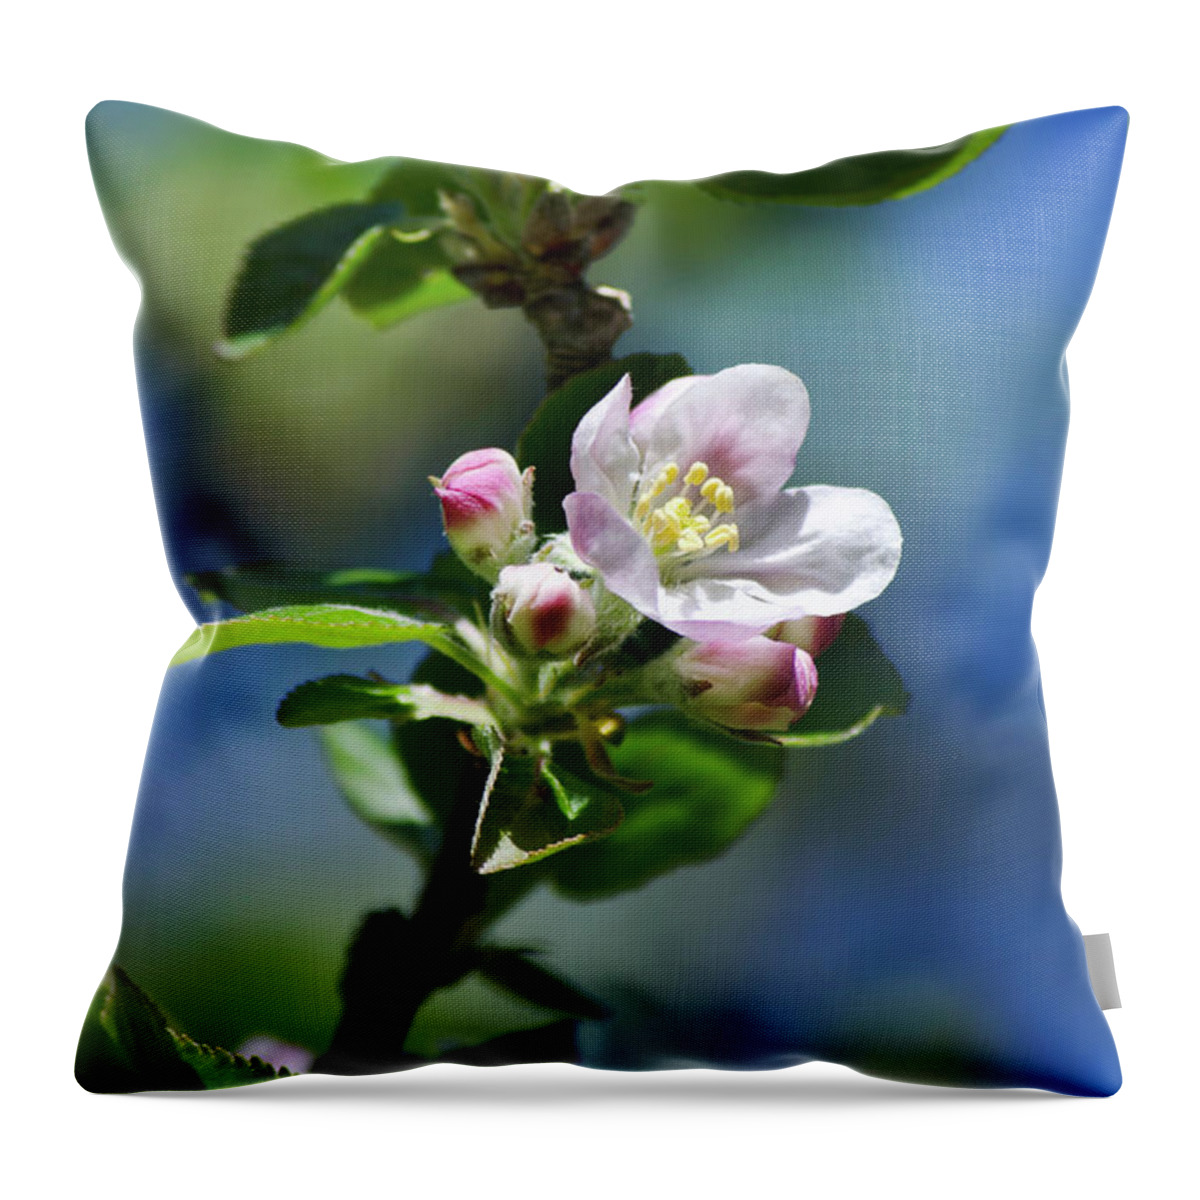 Apple Blossom Throw Pillow featuring the photograph Apple Blossom by Christina Rollo